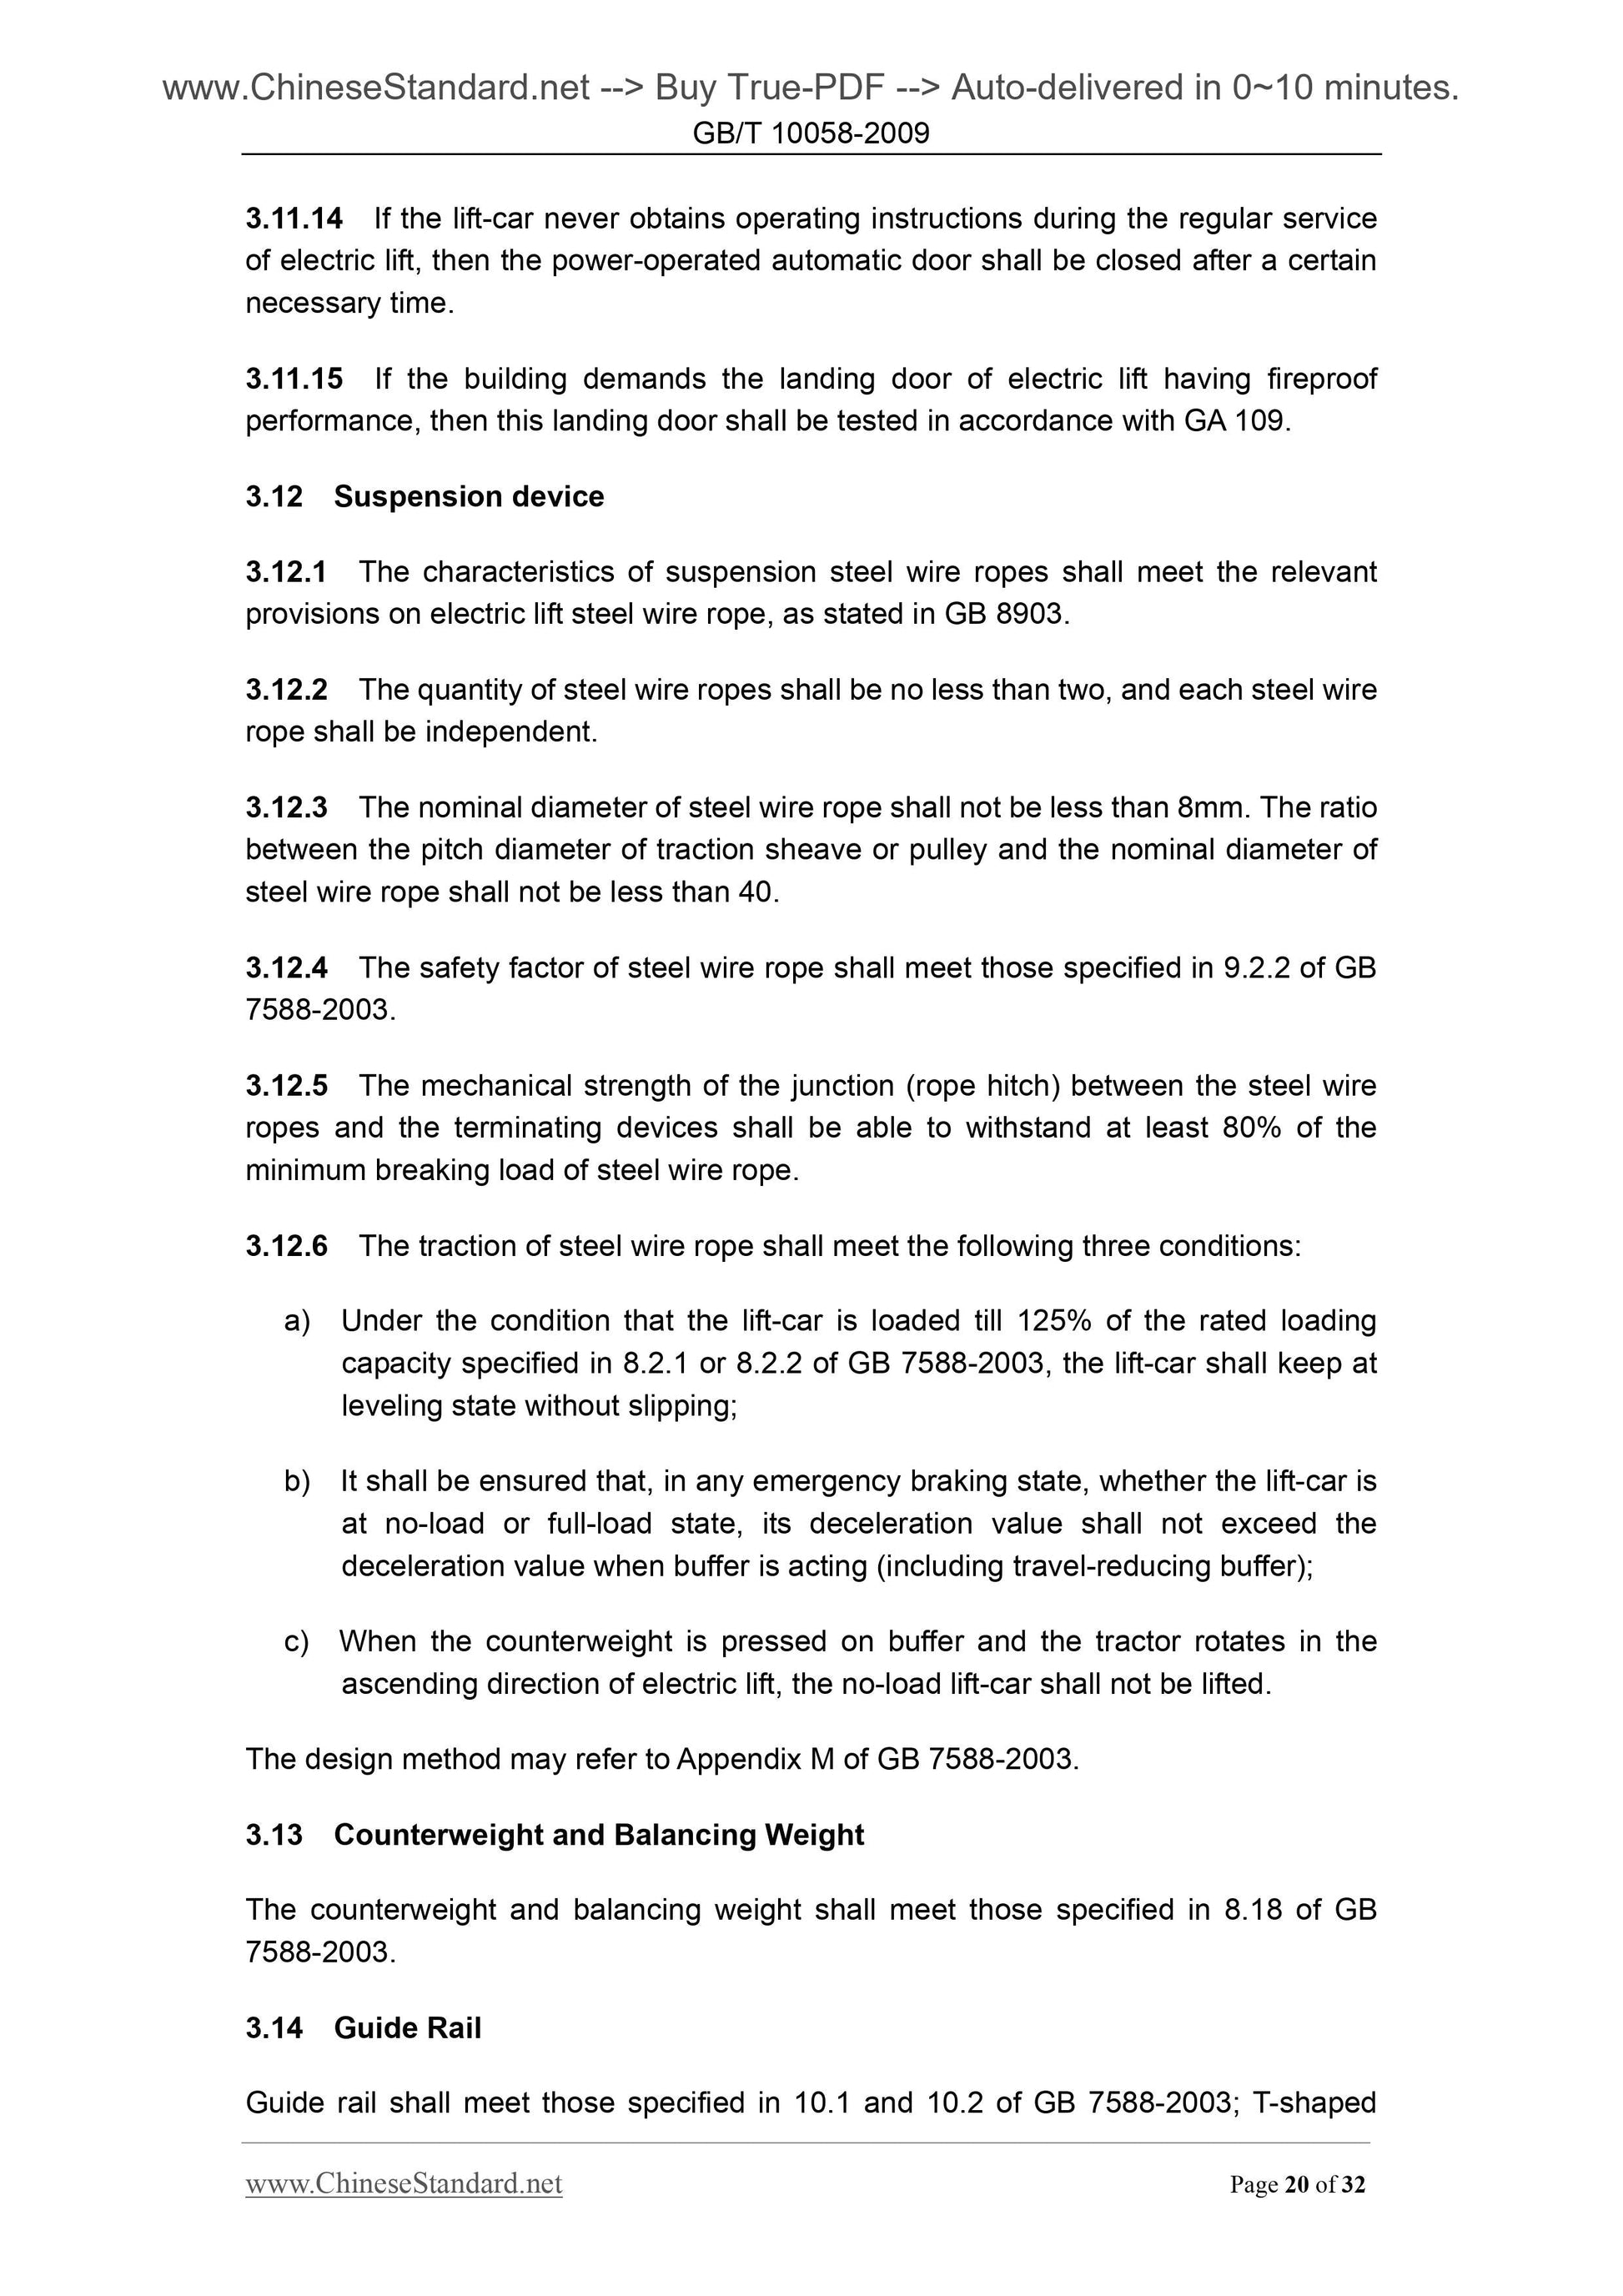 GB/T 10058-2009 Page 12